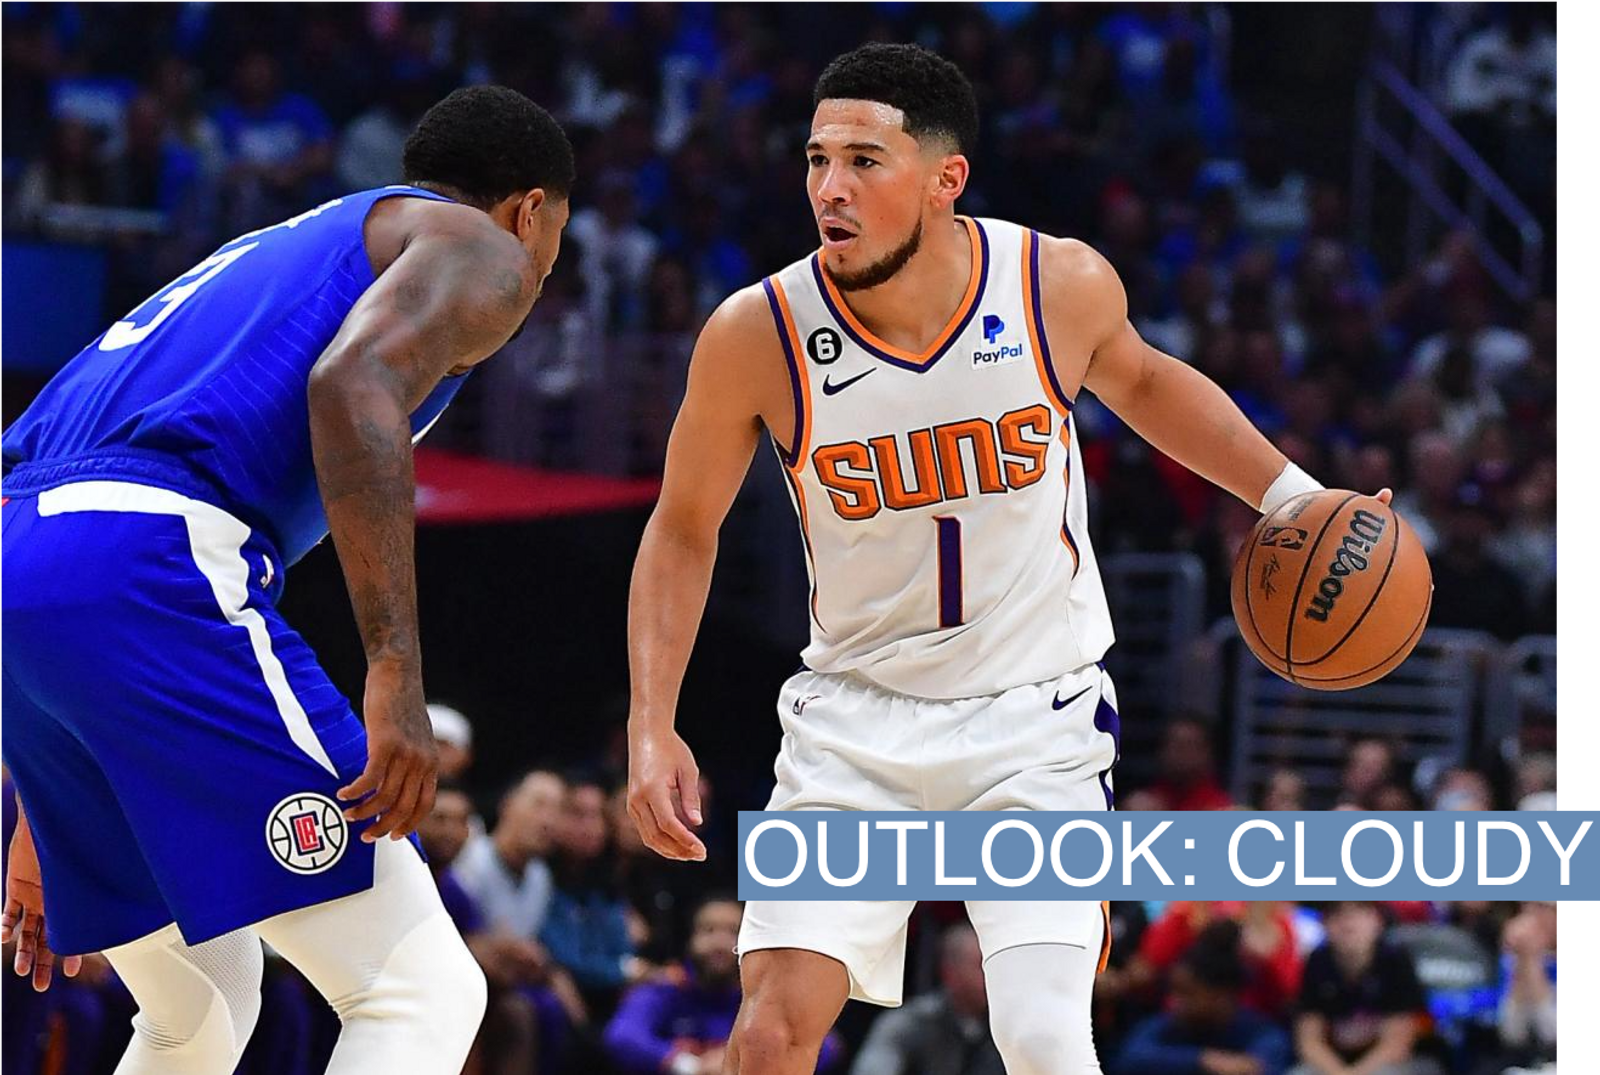 The Suns' Devin Booker dribbles against the Los Angeles Clippers